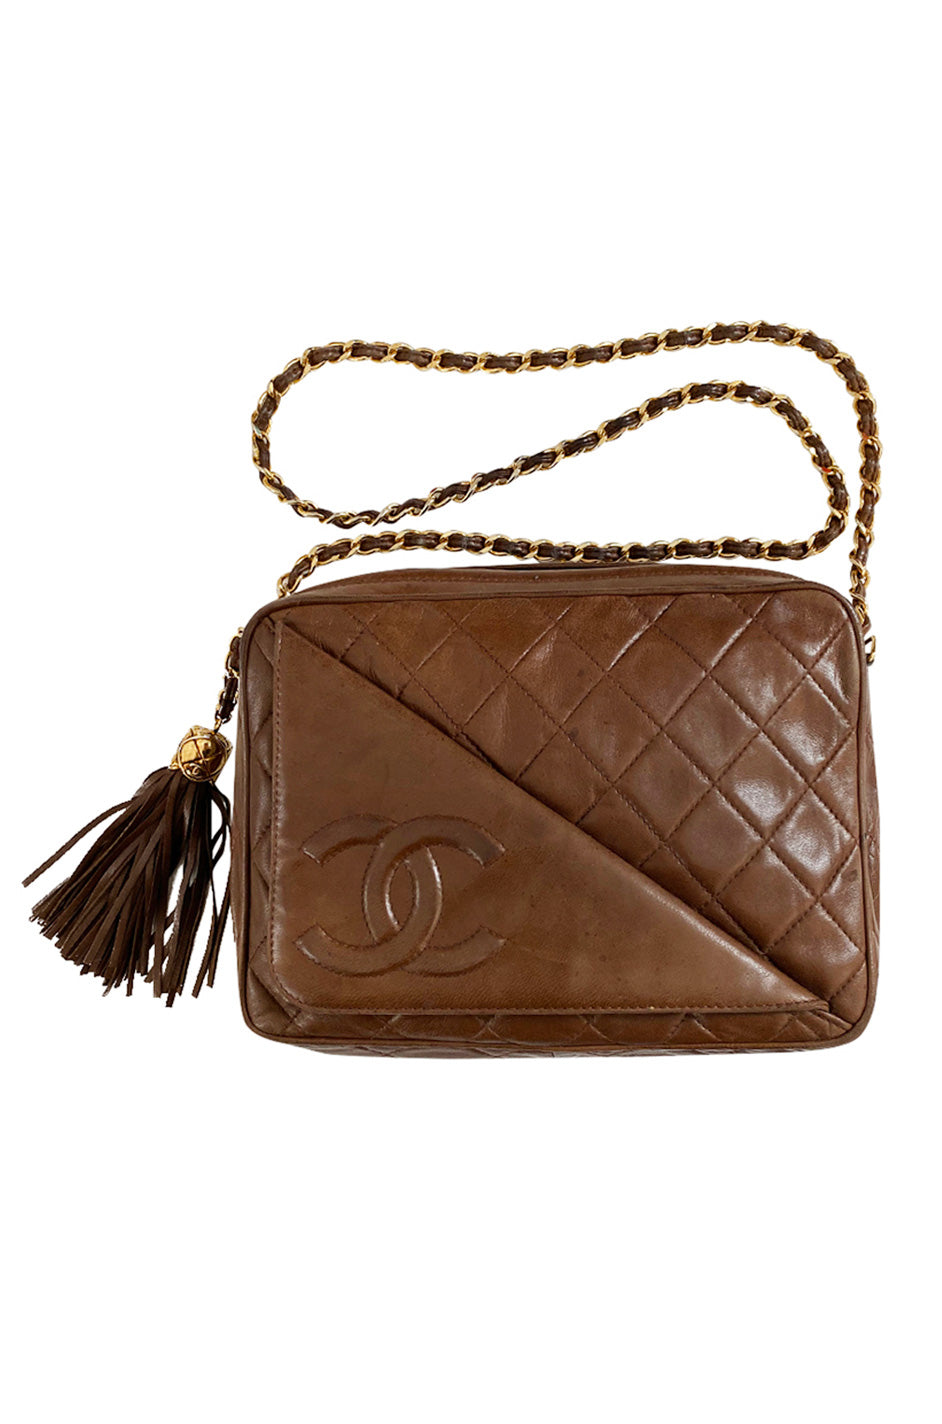 vintage chanel bag with leather strap